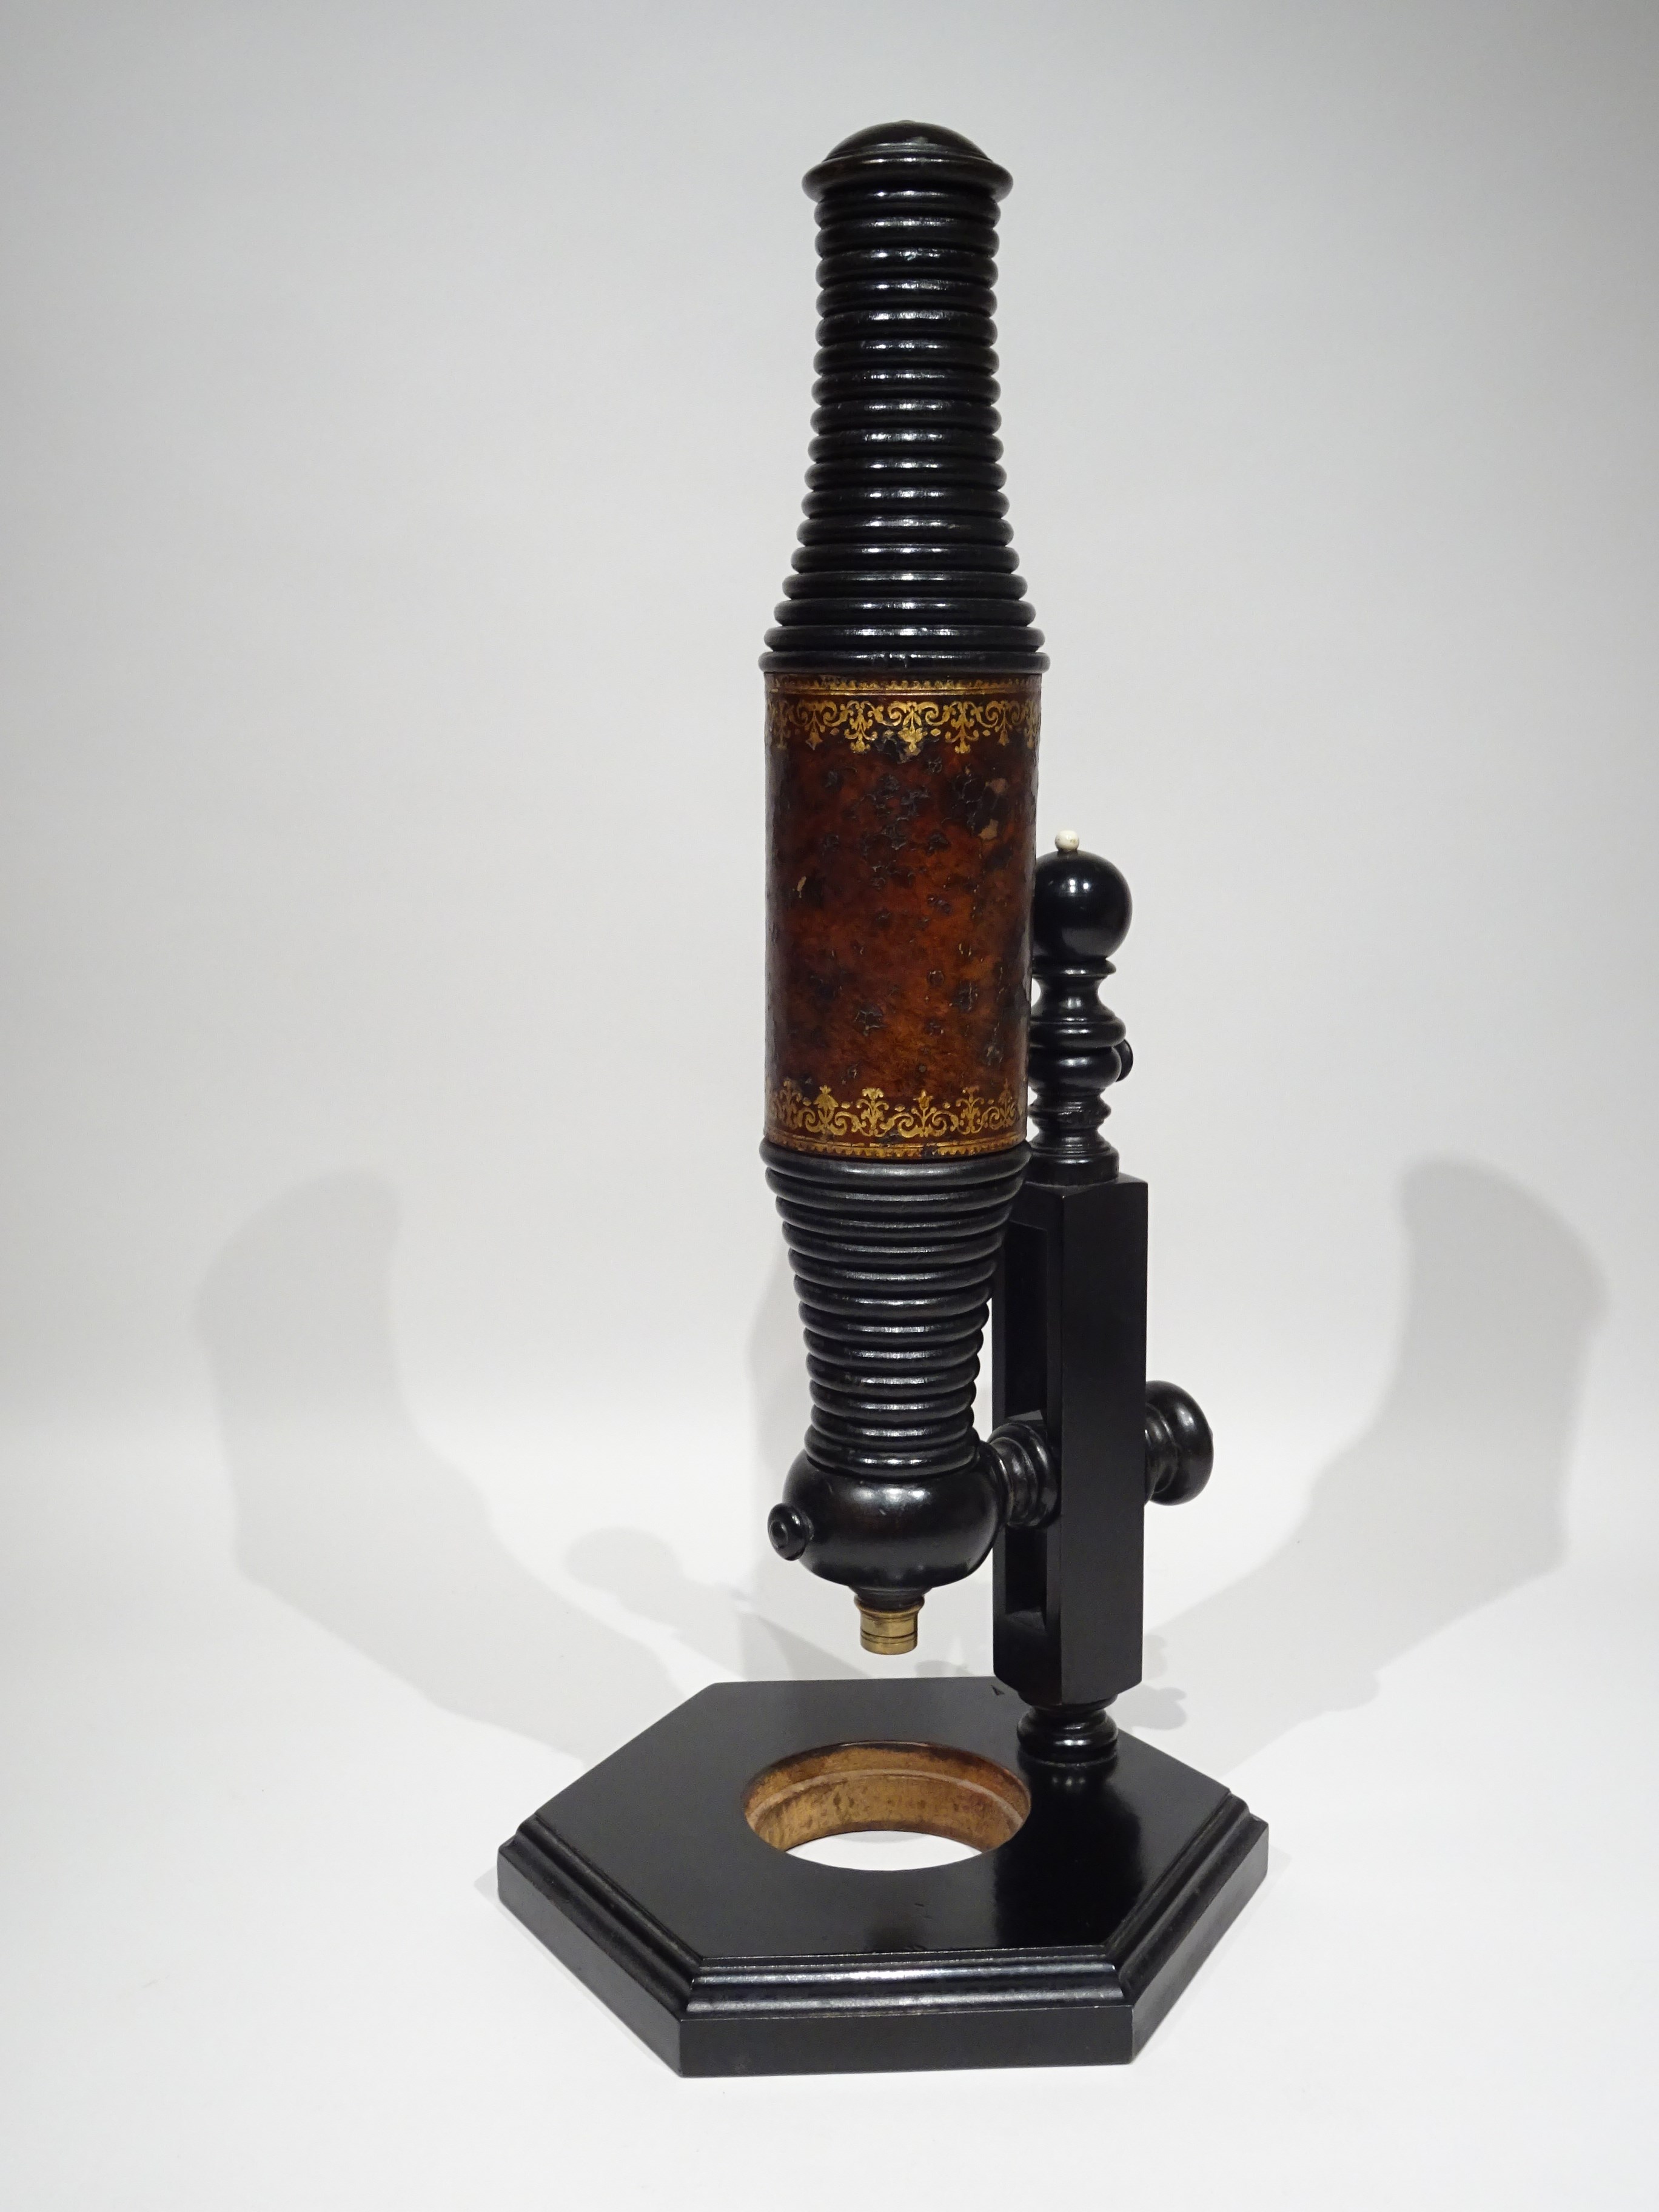 Impressive compound microscope made in Germany at the 18th century.